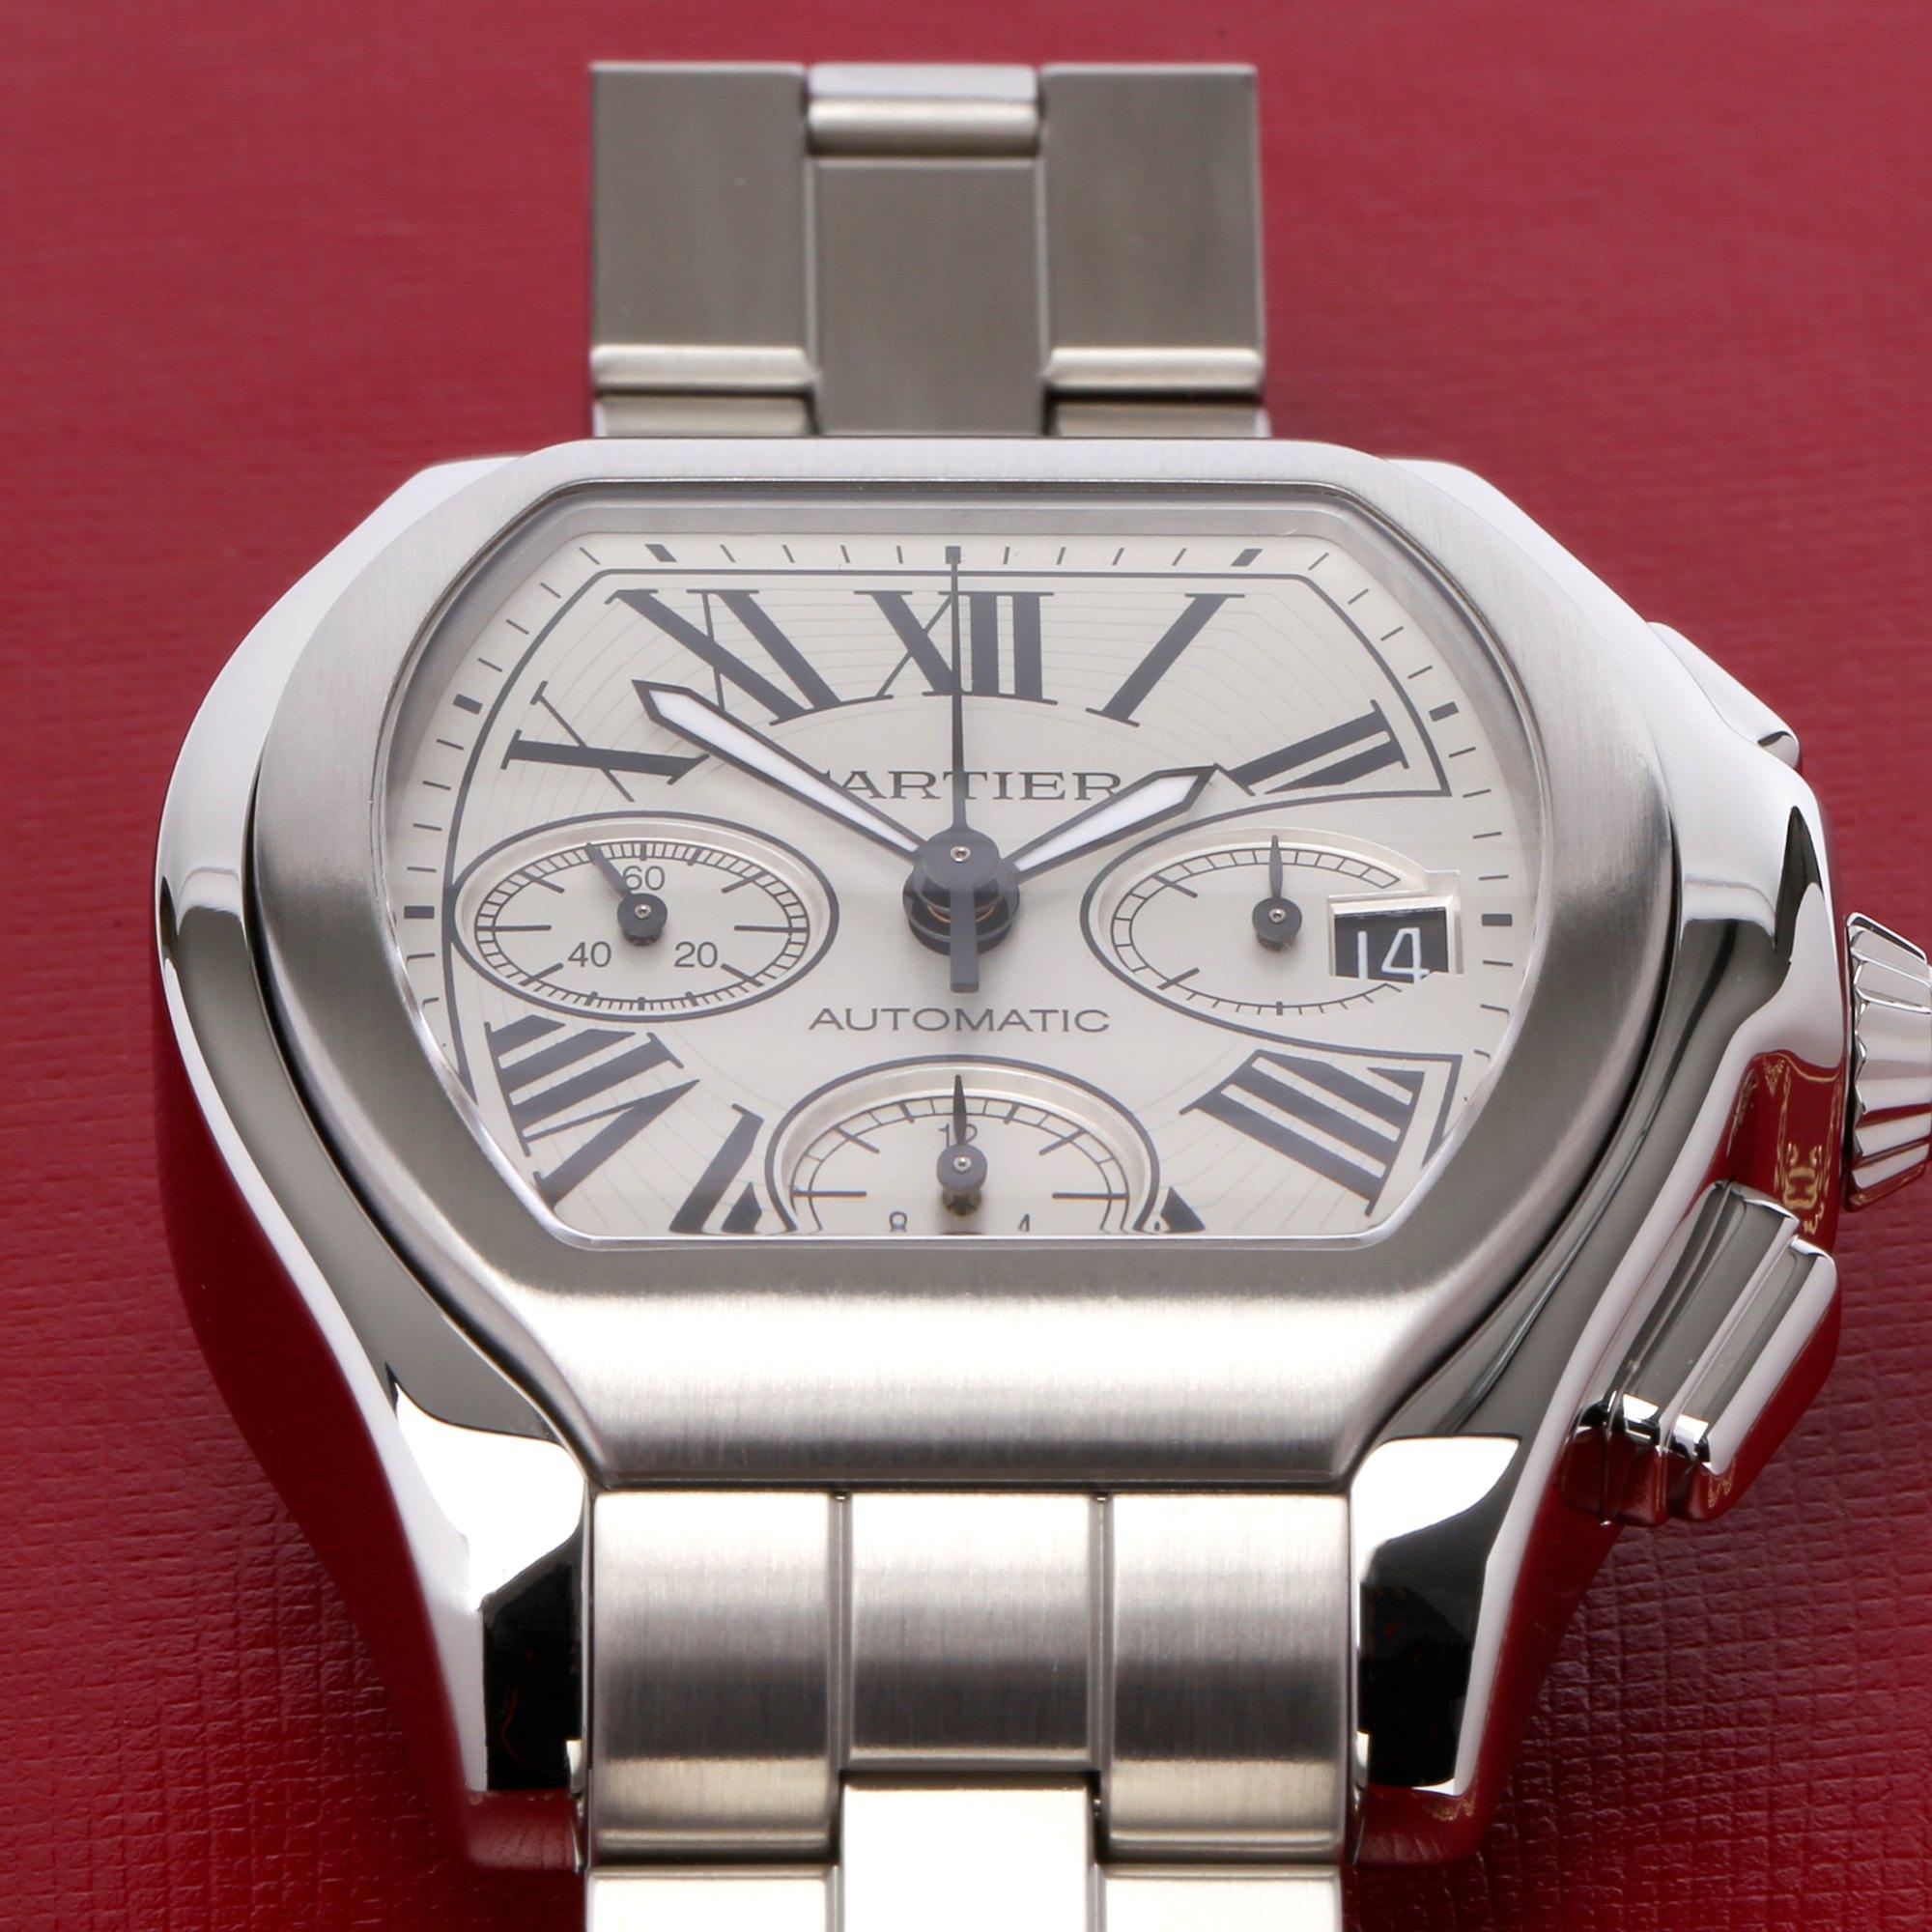 Cartier Roadster XL W6206019 or 3405 Men Stainless Steel Chronograph Watch 2